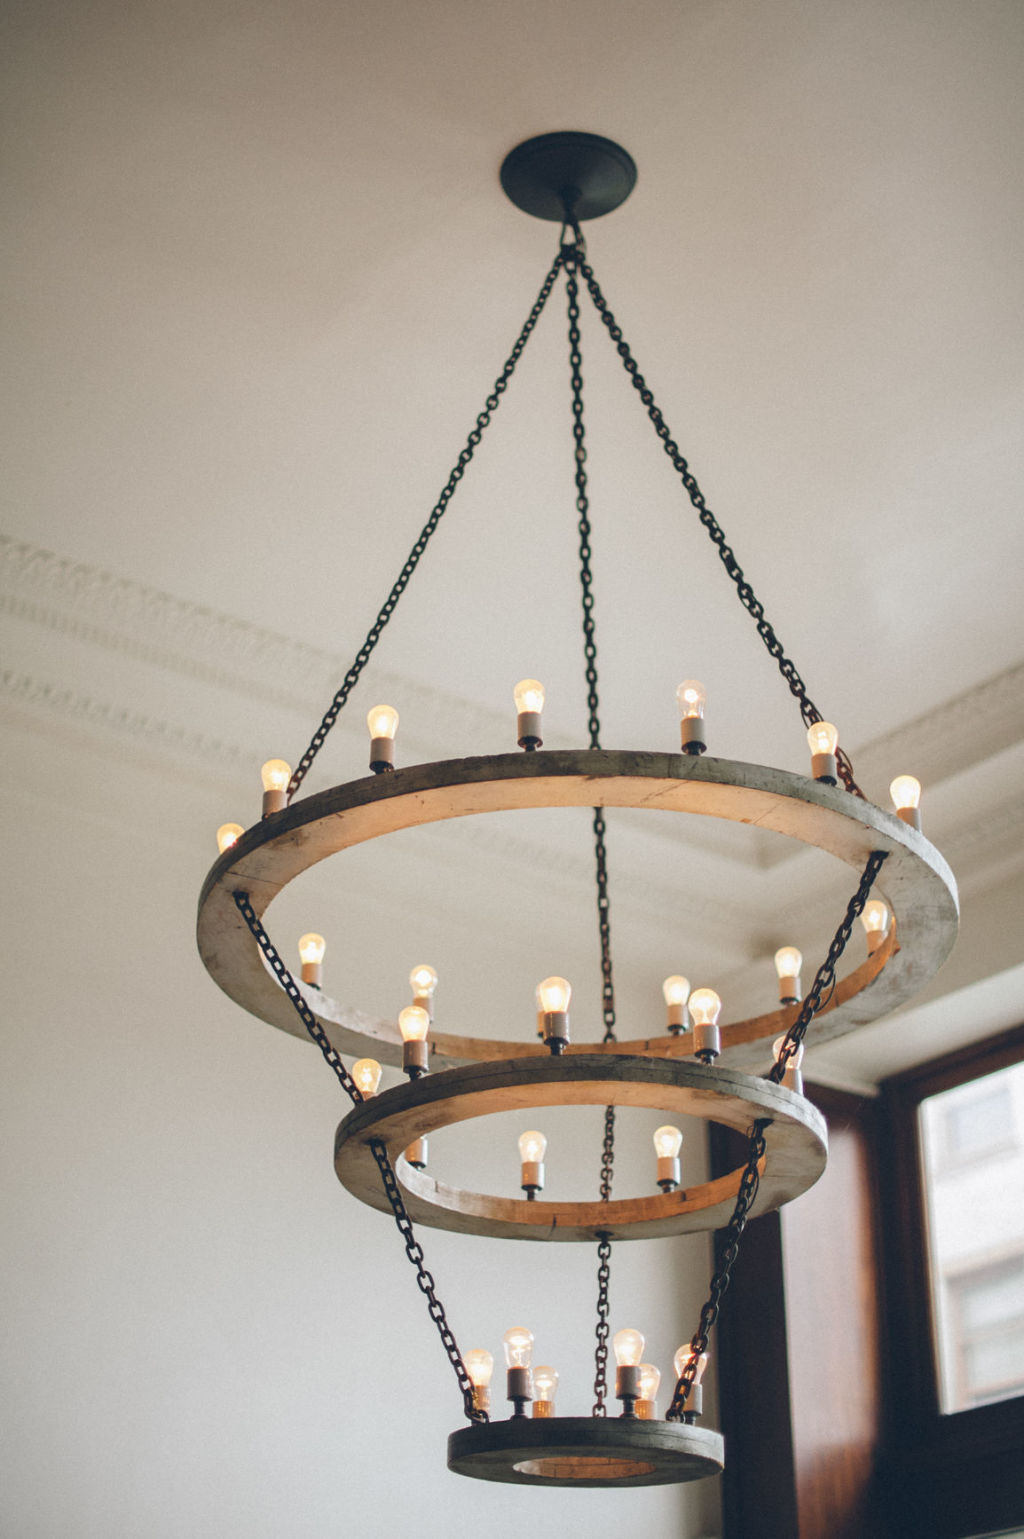 Long gone are the days of the exposed bulbs. Photo: Stocksy